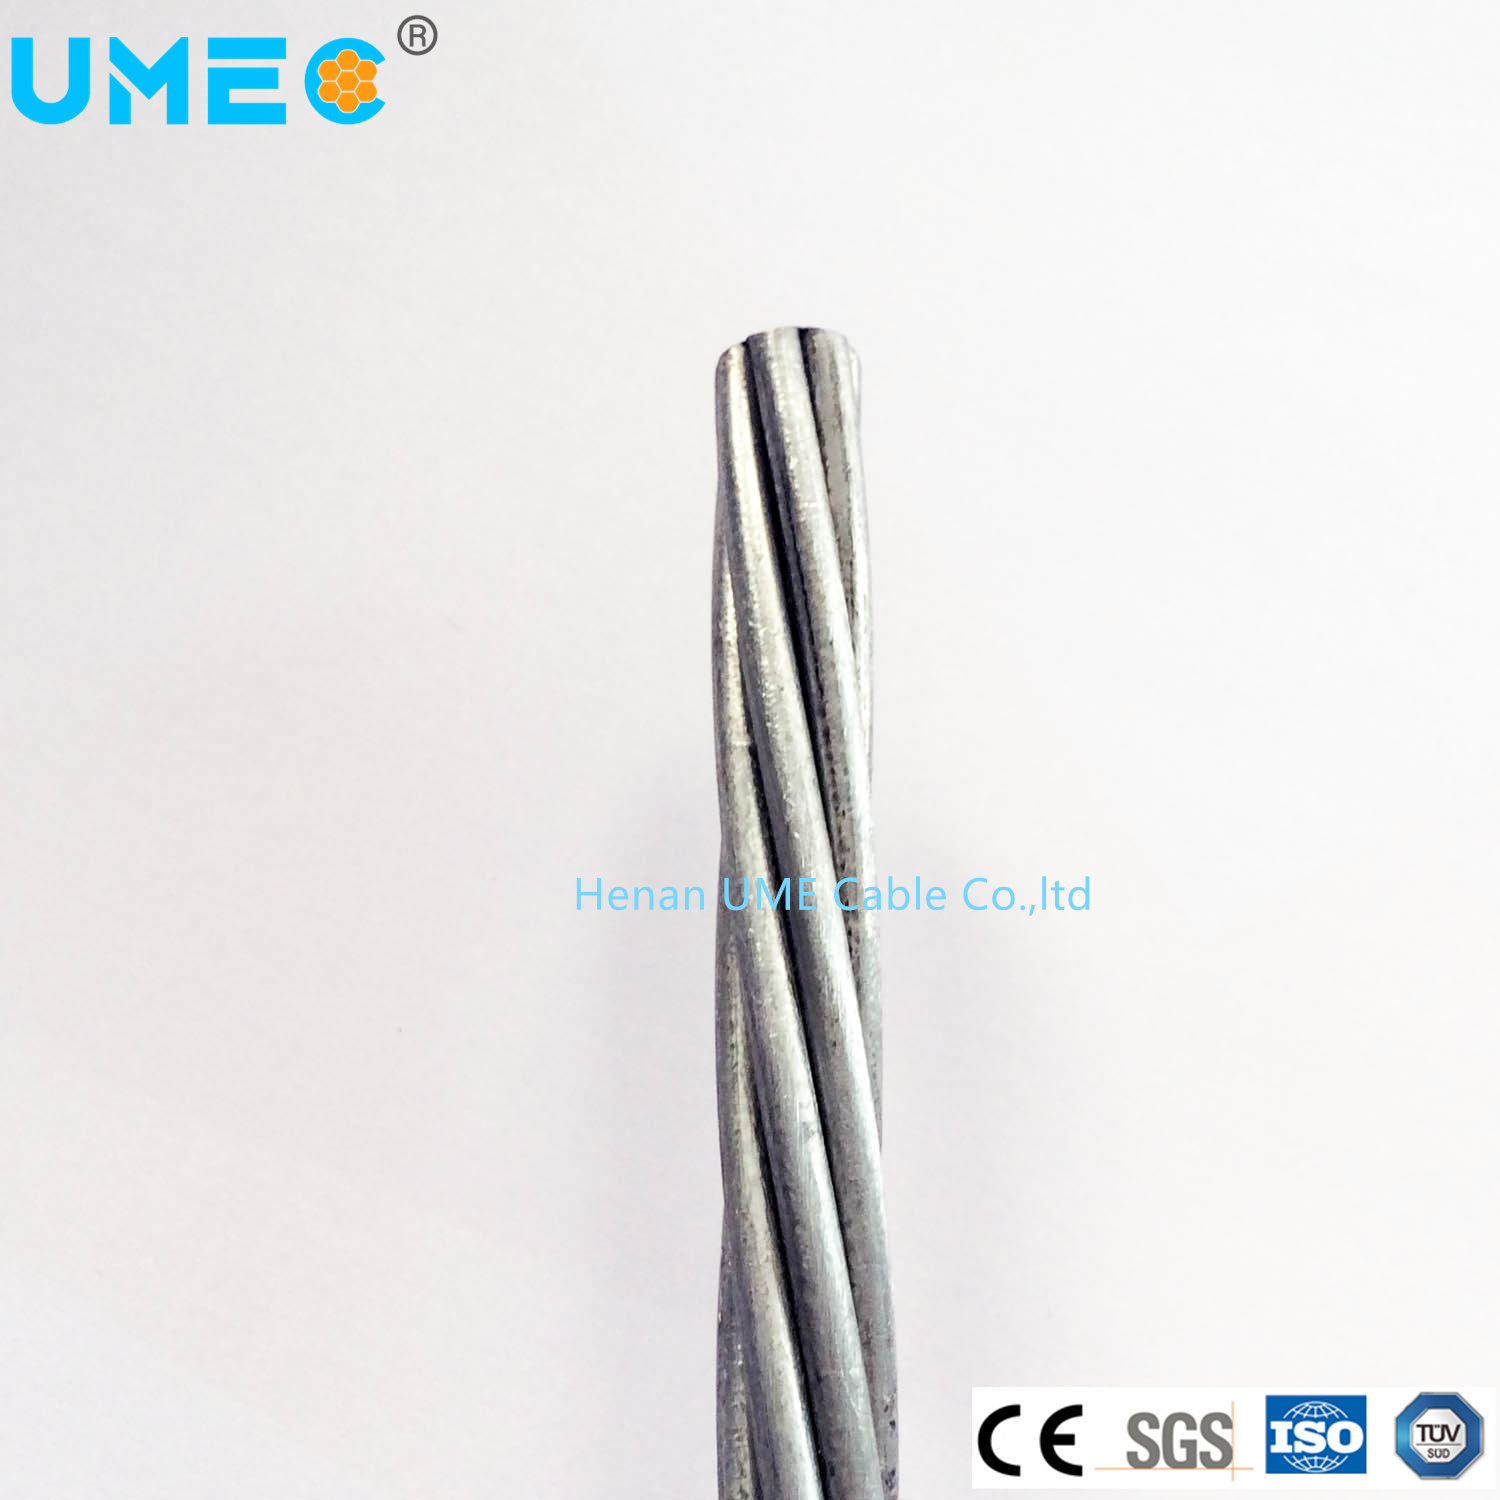 Electrical Gsw Cable Underground Heating Galvanized Steel Wire 7/4.0 19/1.6 Stainless Steel Wire Electrical Cable